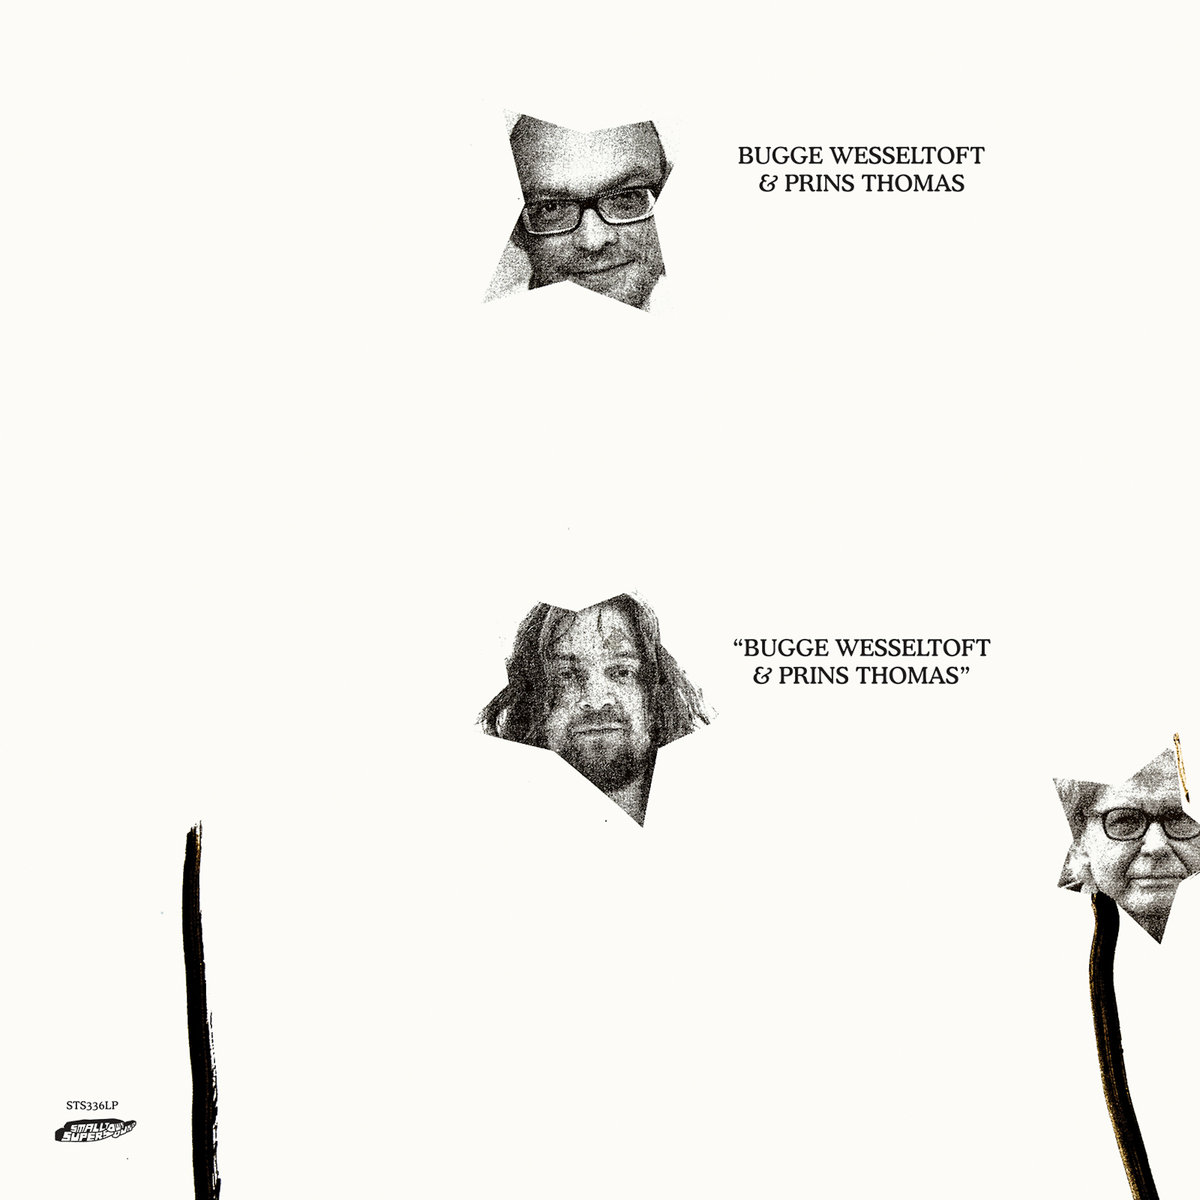 Album of the week: Bugge Wesseltoft and Prins Thomas